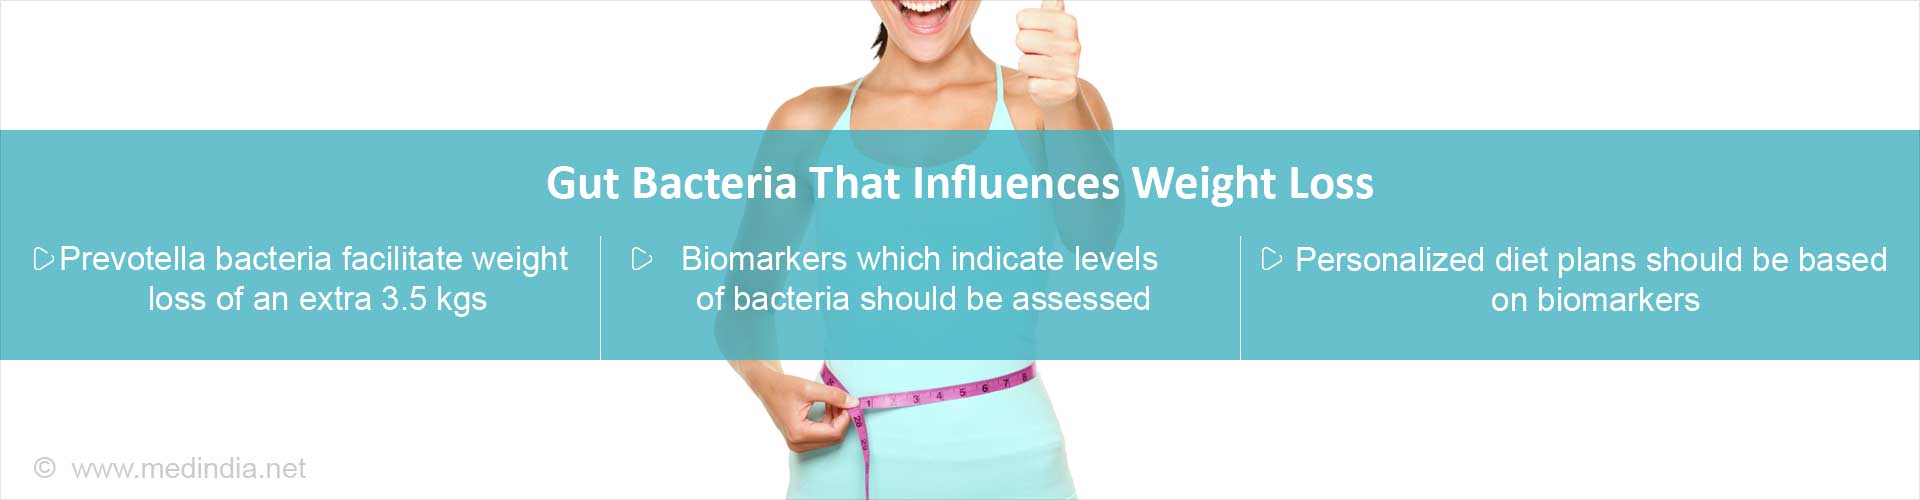 Gut bacteria that influences weight loss
- Prevotella bacteria facilitate weight loss of an extra 3.5 kgs
- Biomarkers which indicate levels of bacteria should be assessed
- Personalized diet plans should be based on biomarkers